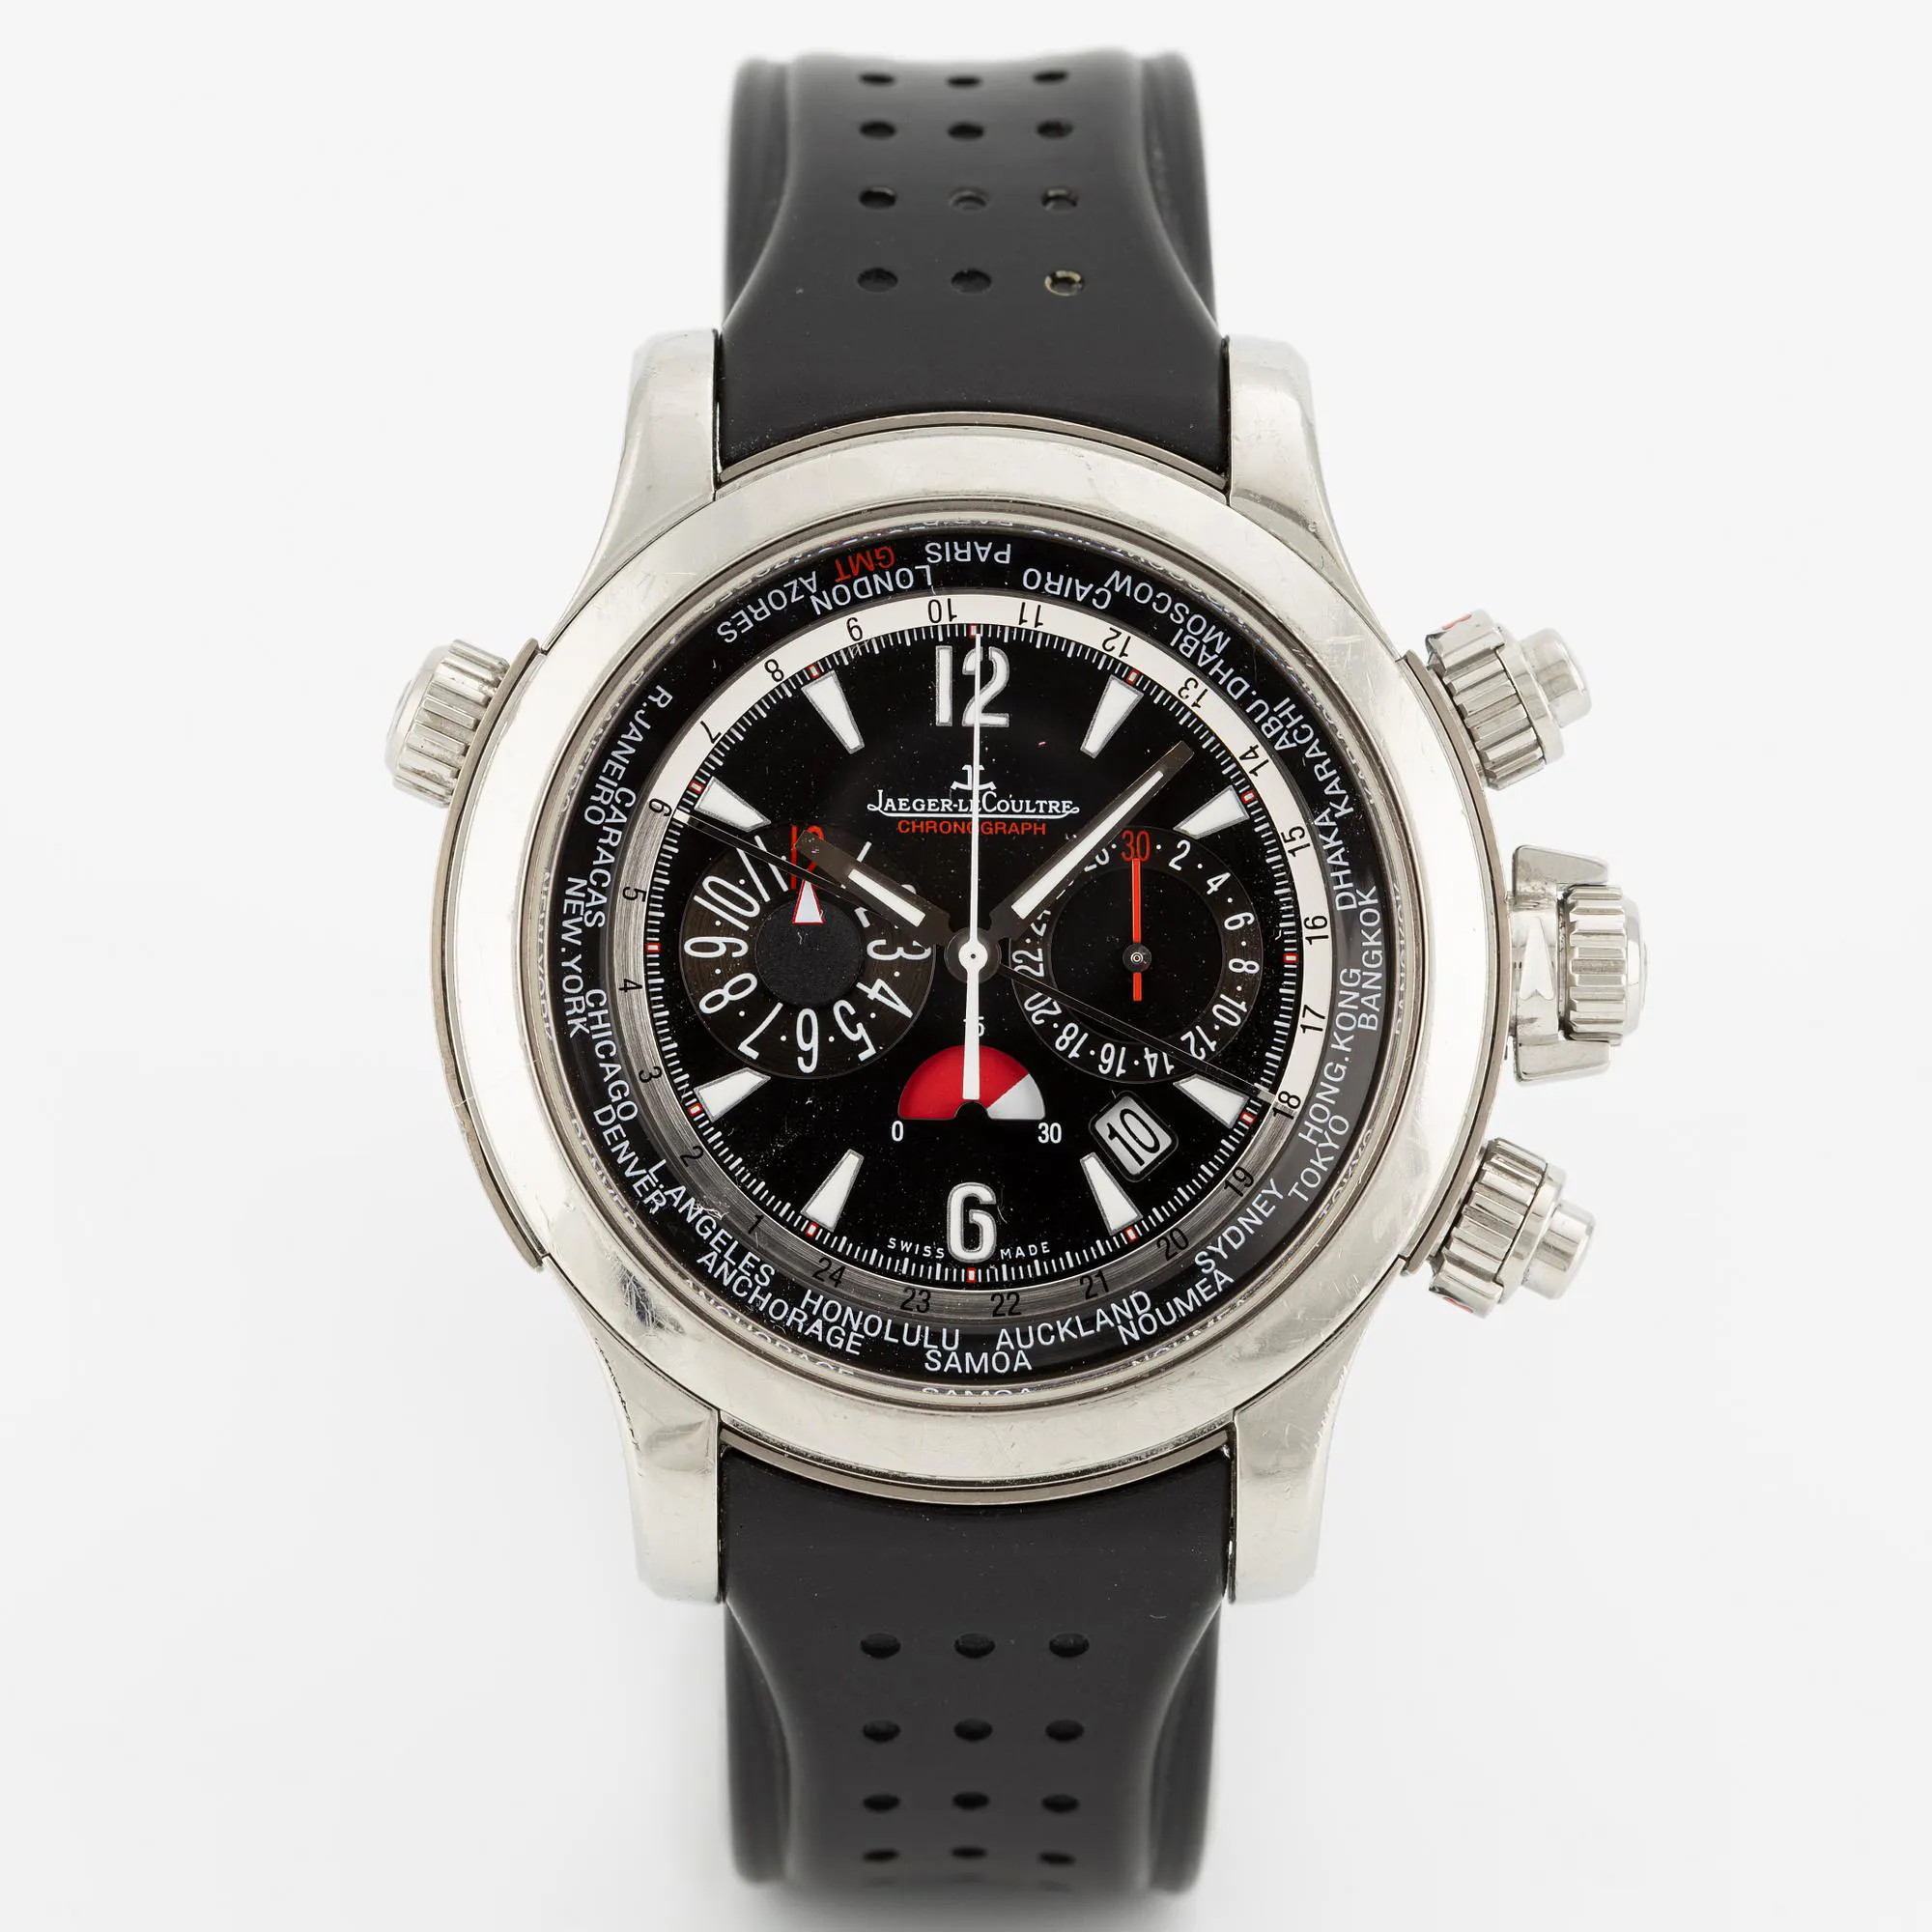 Jaeger-LeCoultre Master Compressor Extreme World Chronograph 1768470 46.5mm Titanium and stainless steel